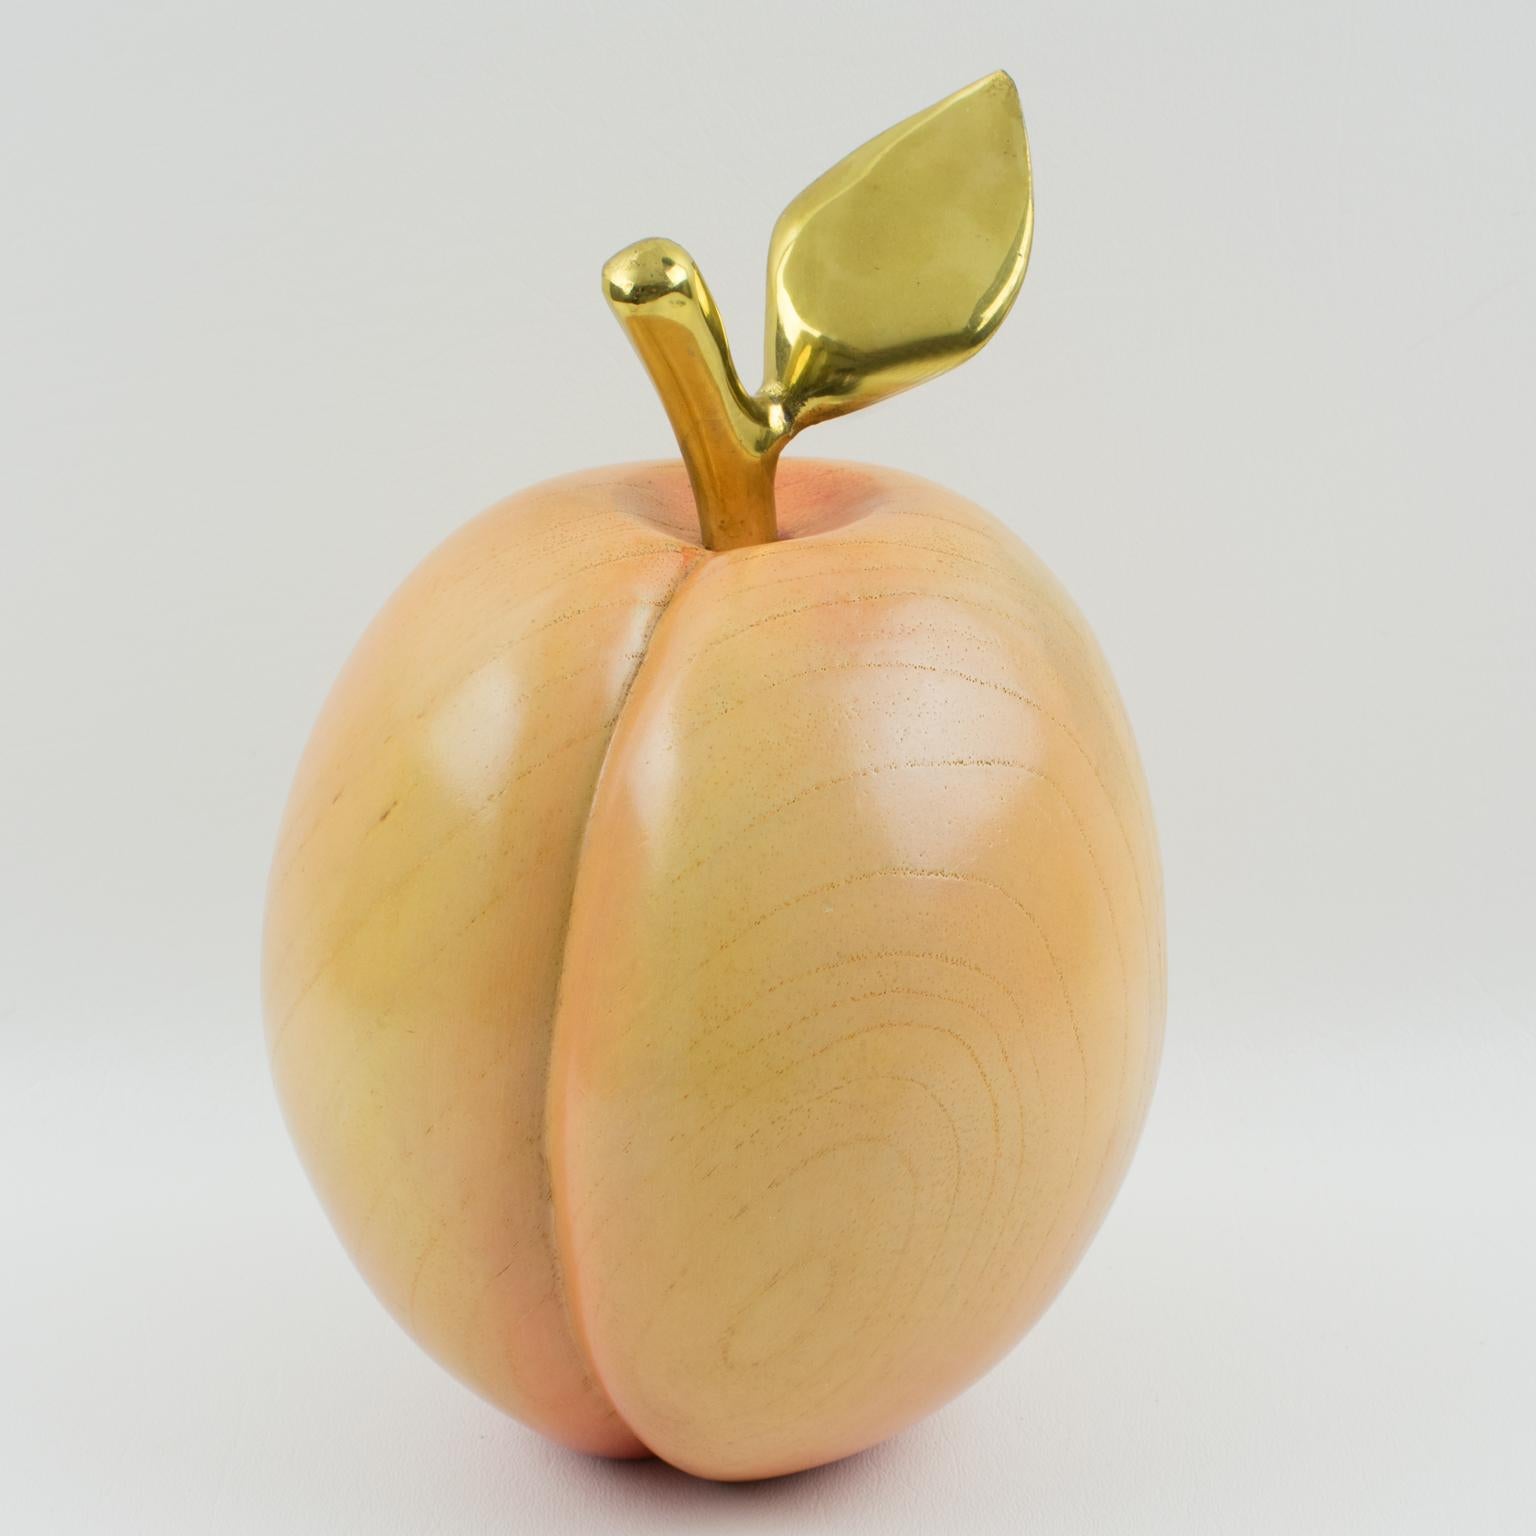 Italian Oversized Carved Wood and Brass Peach Decorative Sculpture, 1980s For Sale 2